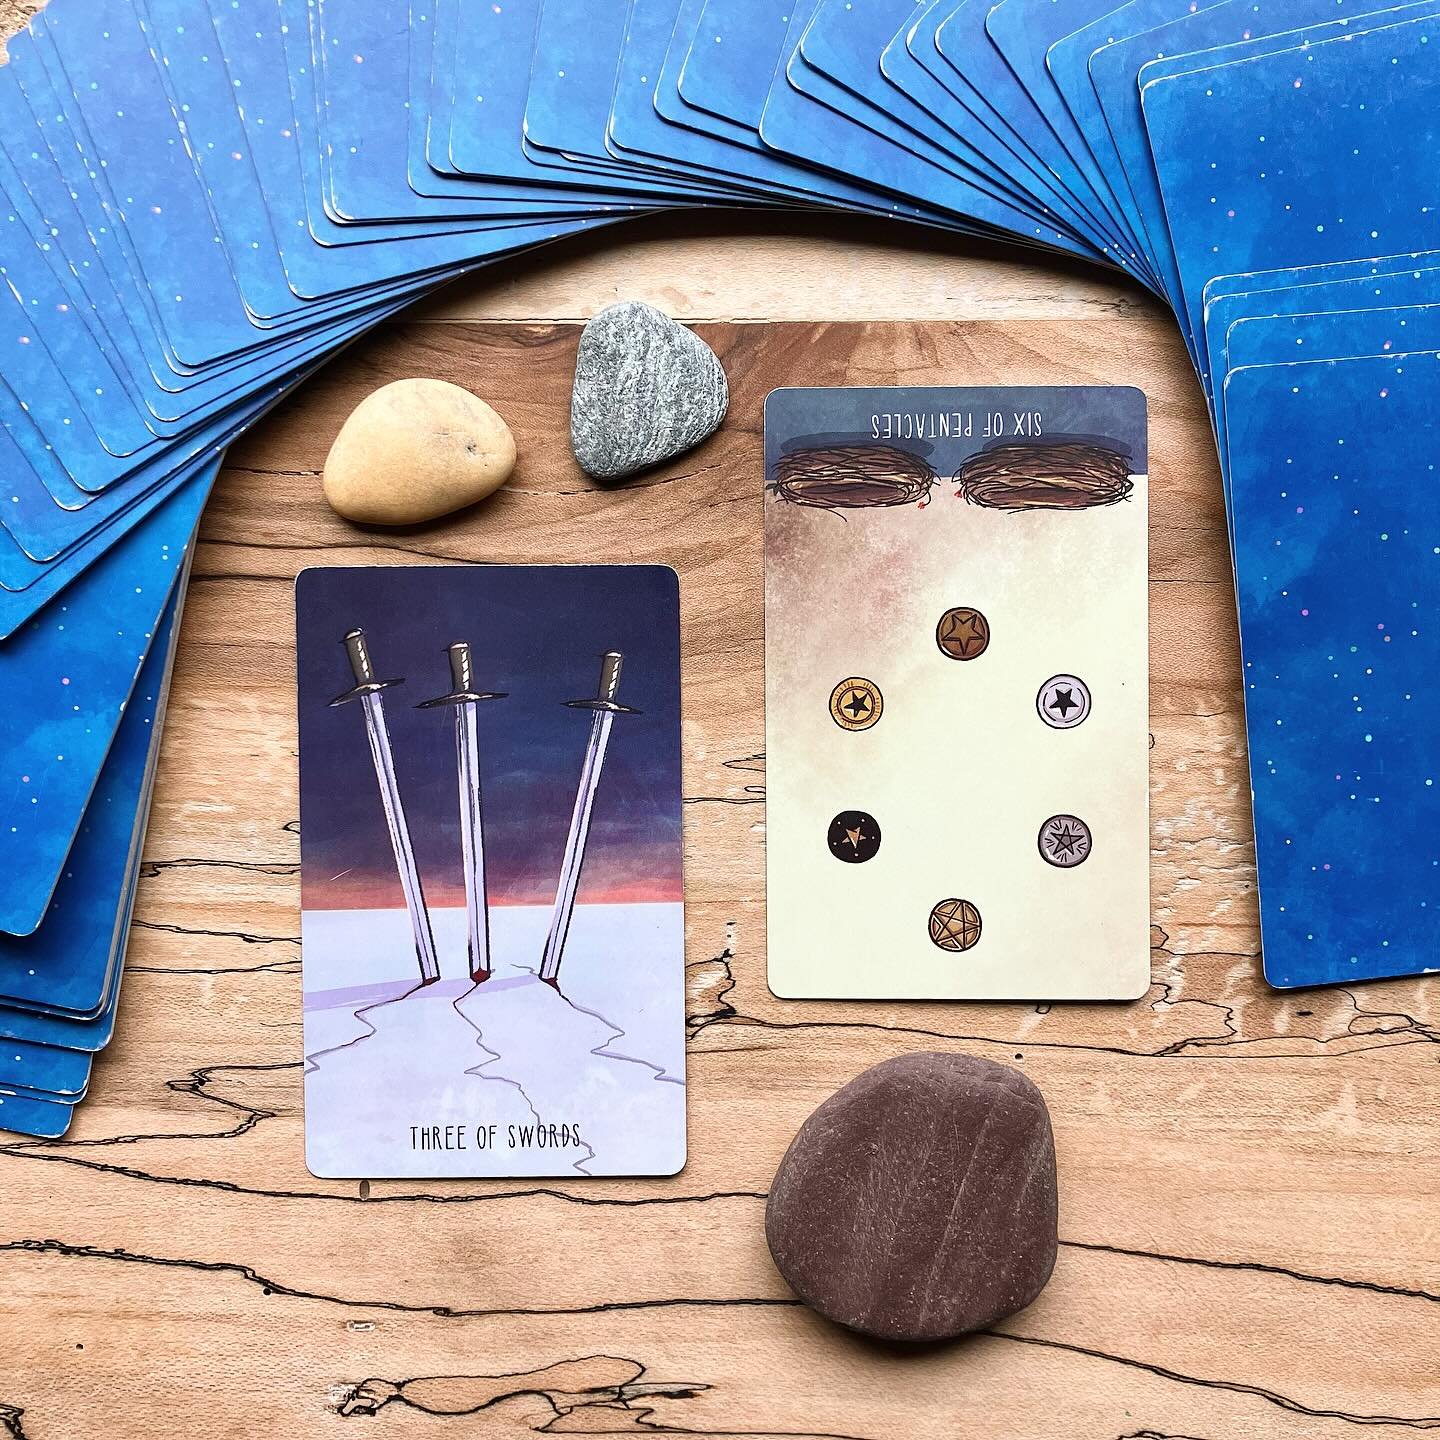 Today is a bit tricky- it may feel like you are giving a lot more than you are receiving. Or it may feel like you have to give something precious in order to receive and the trade off is painful. Is there any way for things to feel more balanced and 